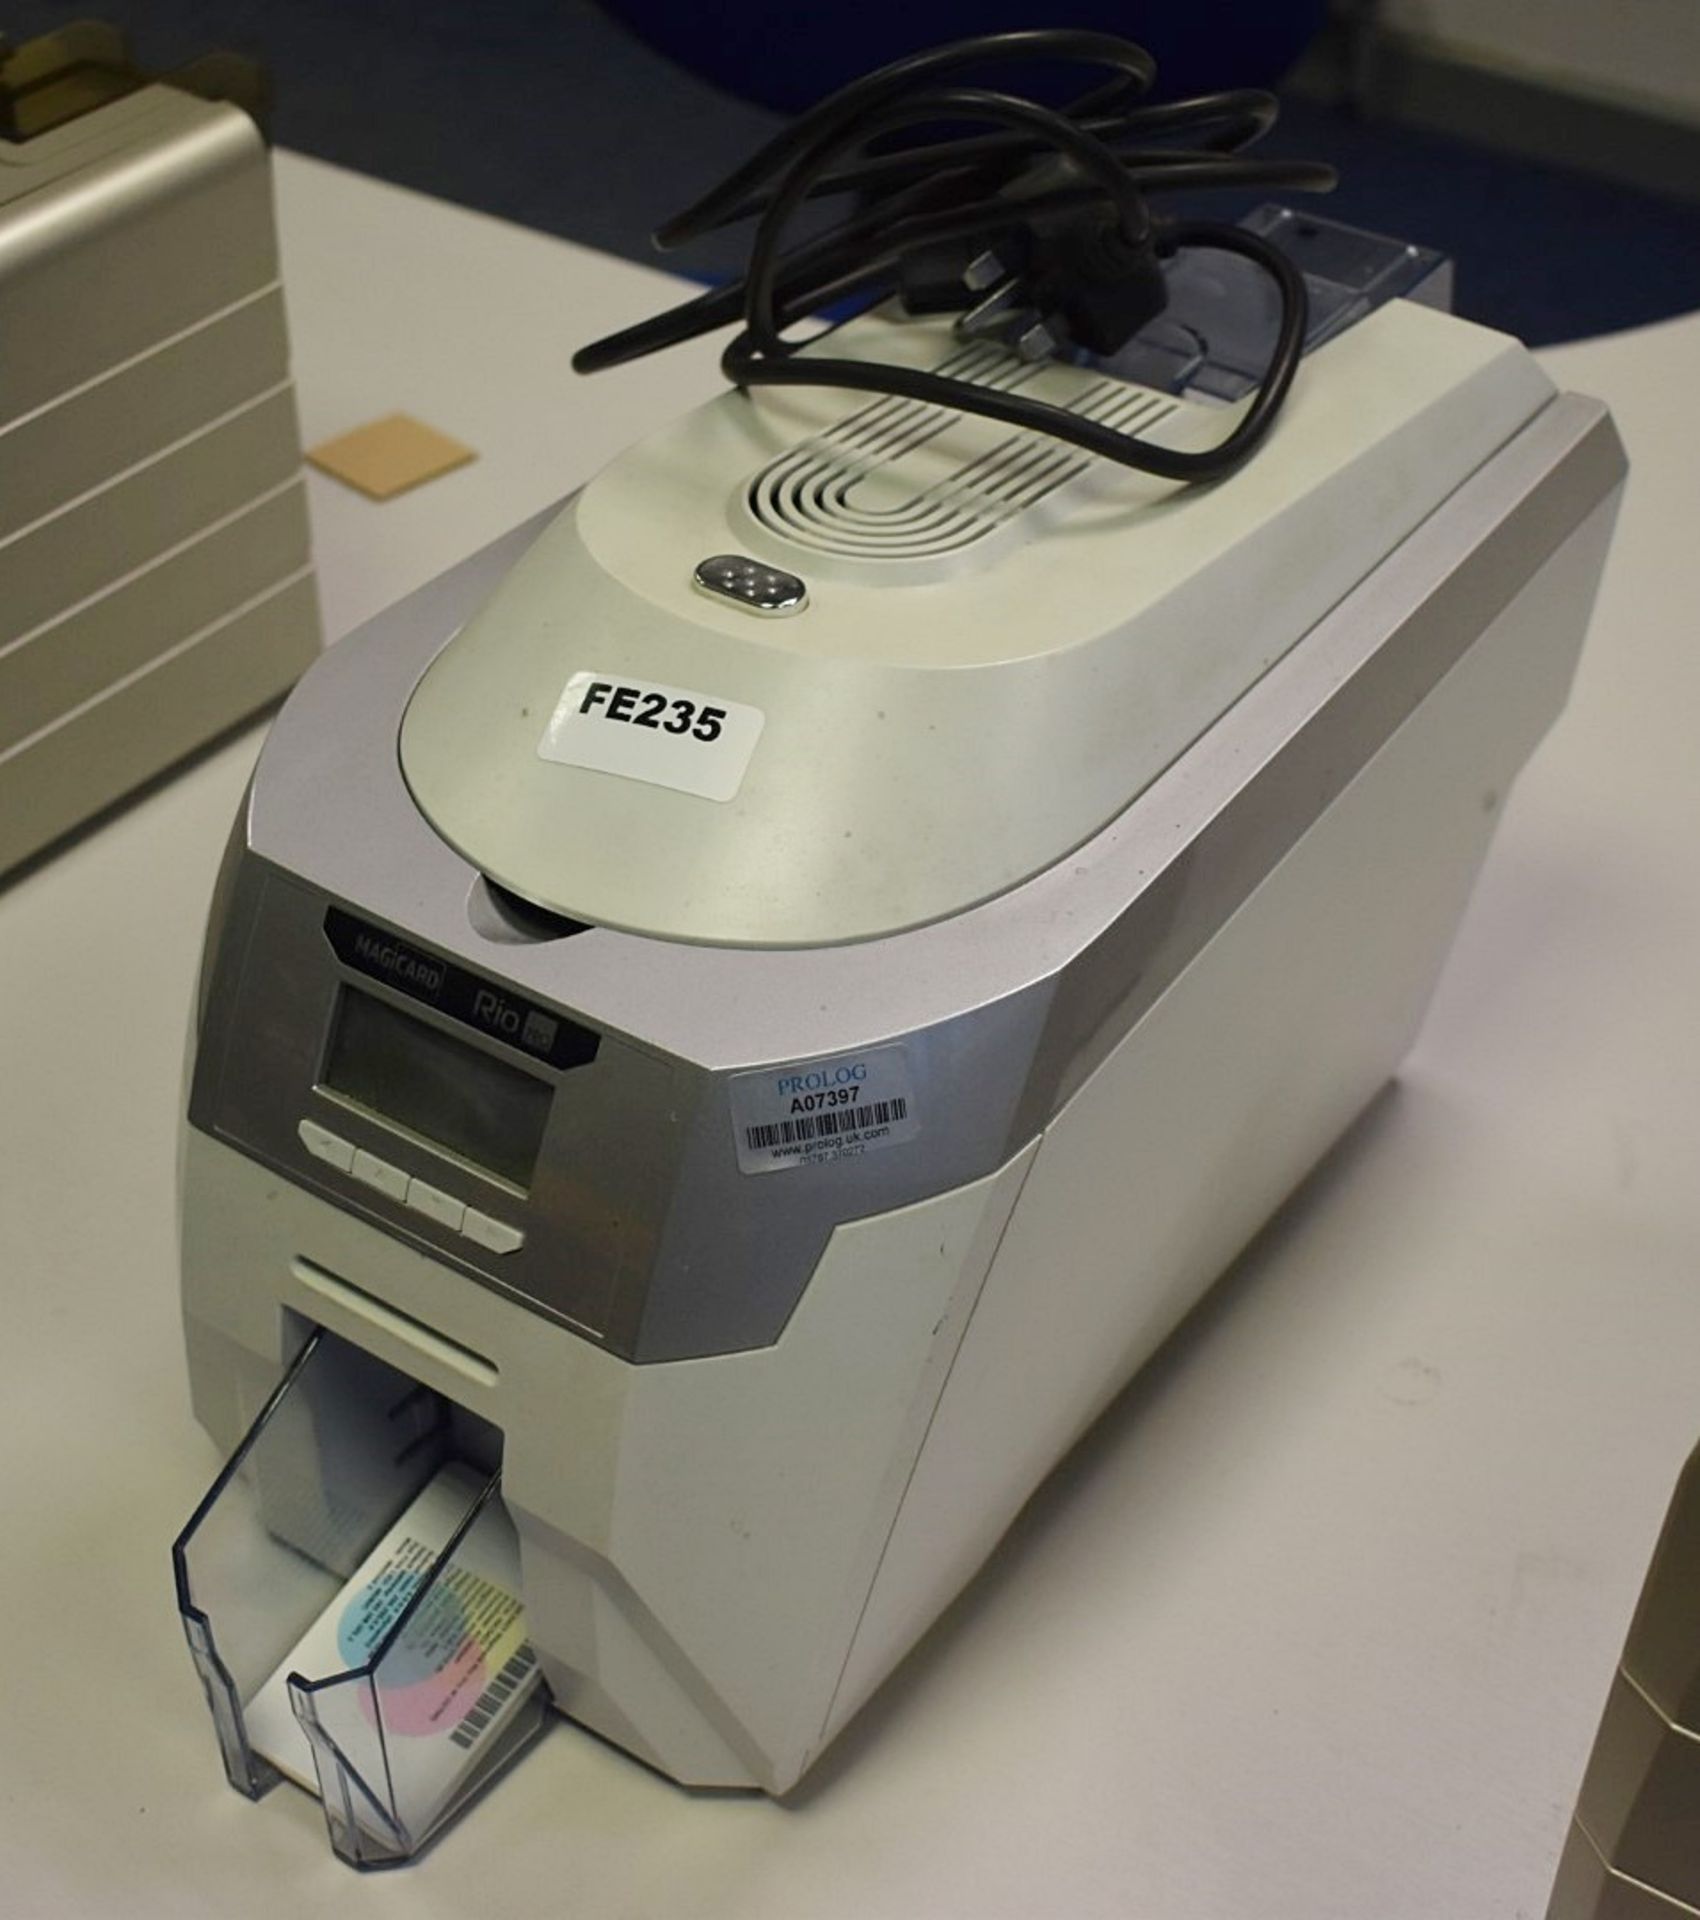 1 x Magicard Rio Pro ID Card Printer - Ref FE235 ODS - CL480 - Location: Nottingham NG15 - Image 4 of 7